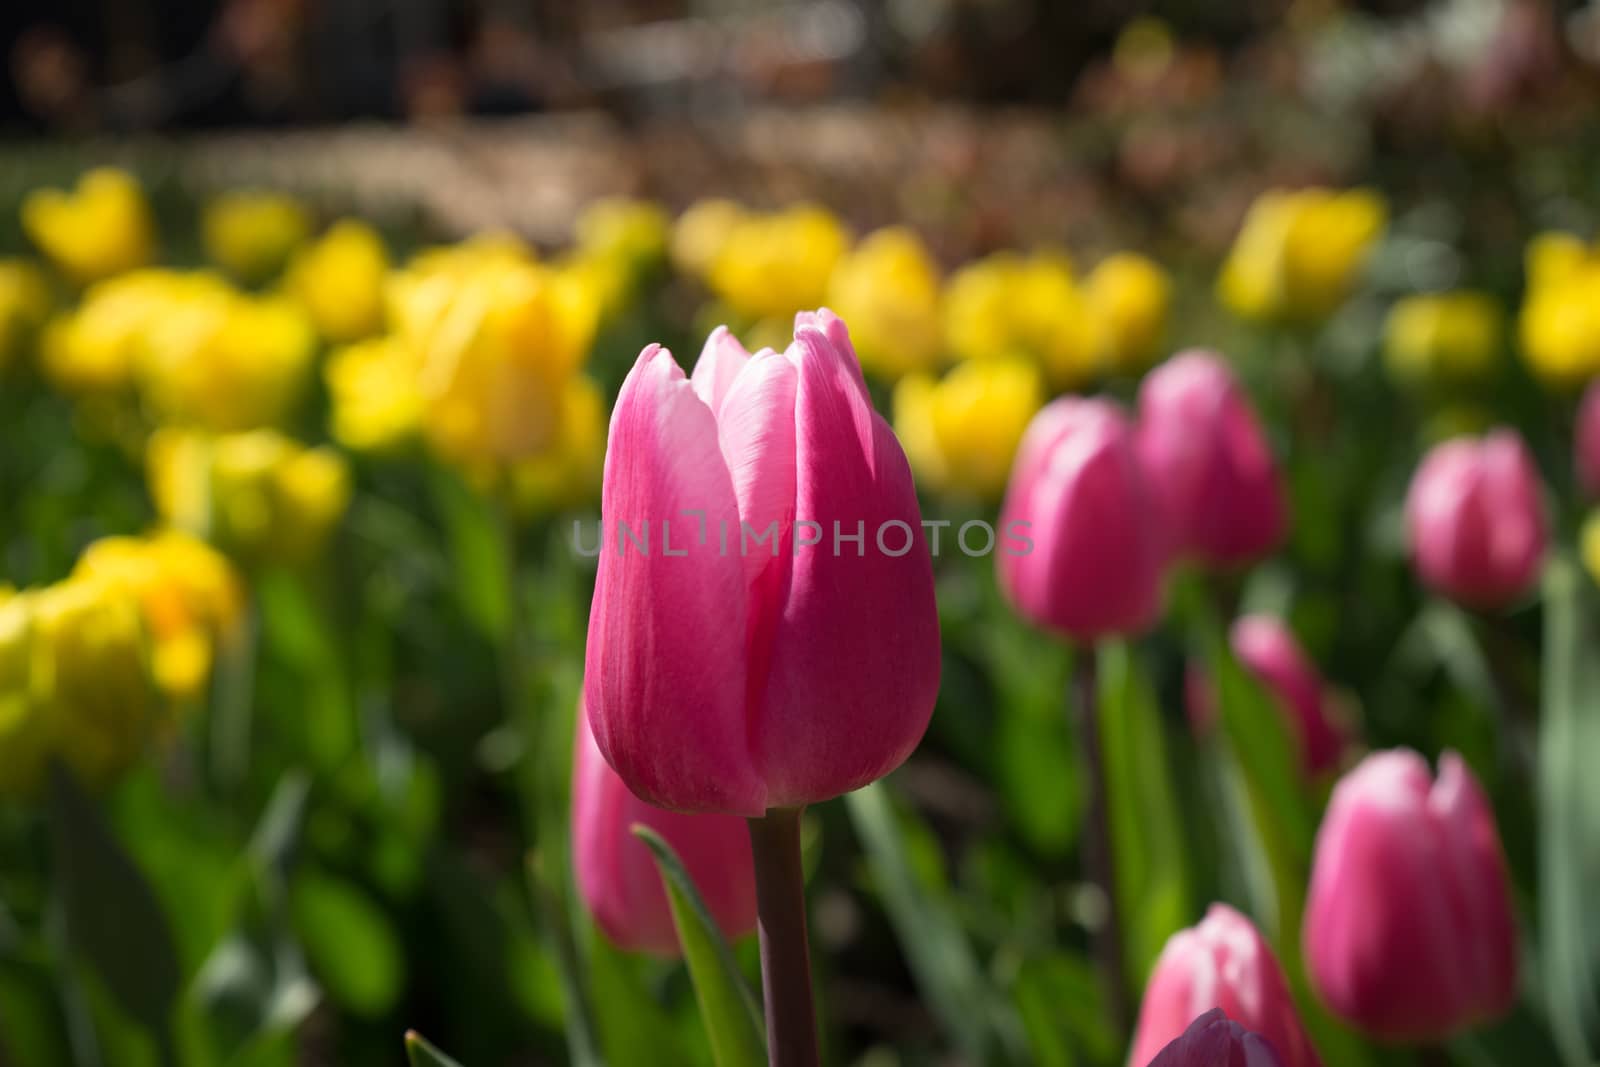 Pink and rose colored Tulips in a garden in Lisse, Netherlands, europe with grass on a bright summer day with yellow blurred background